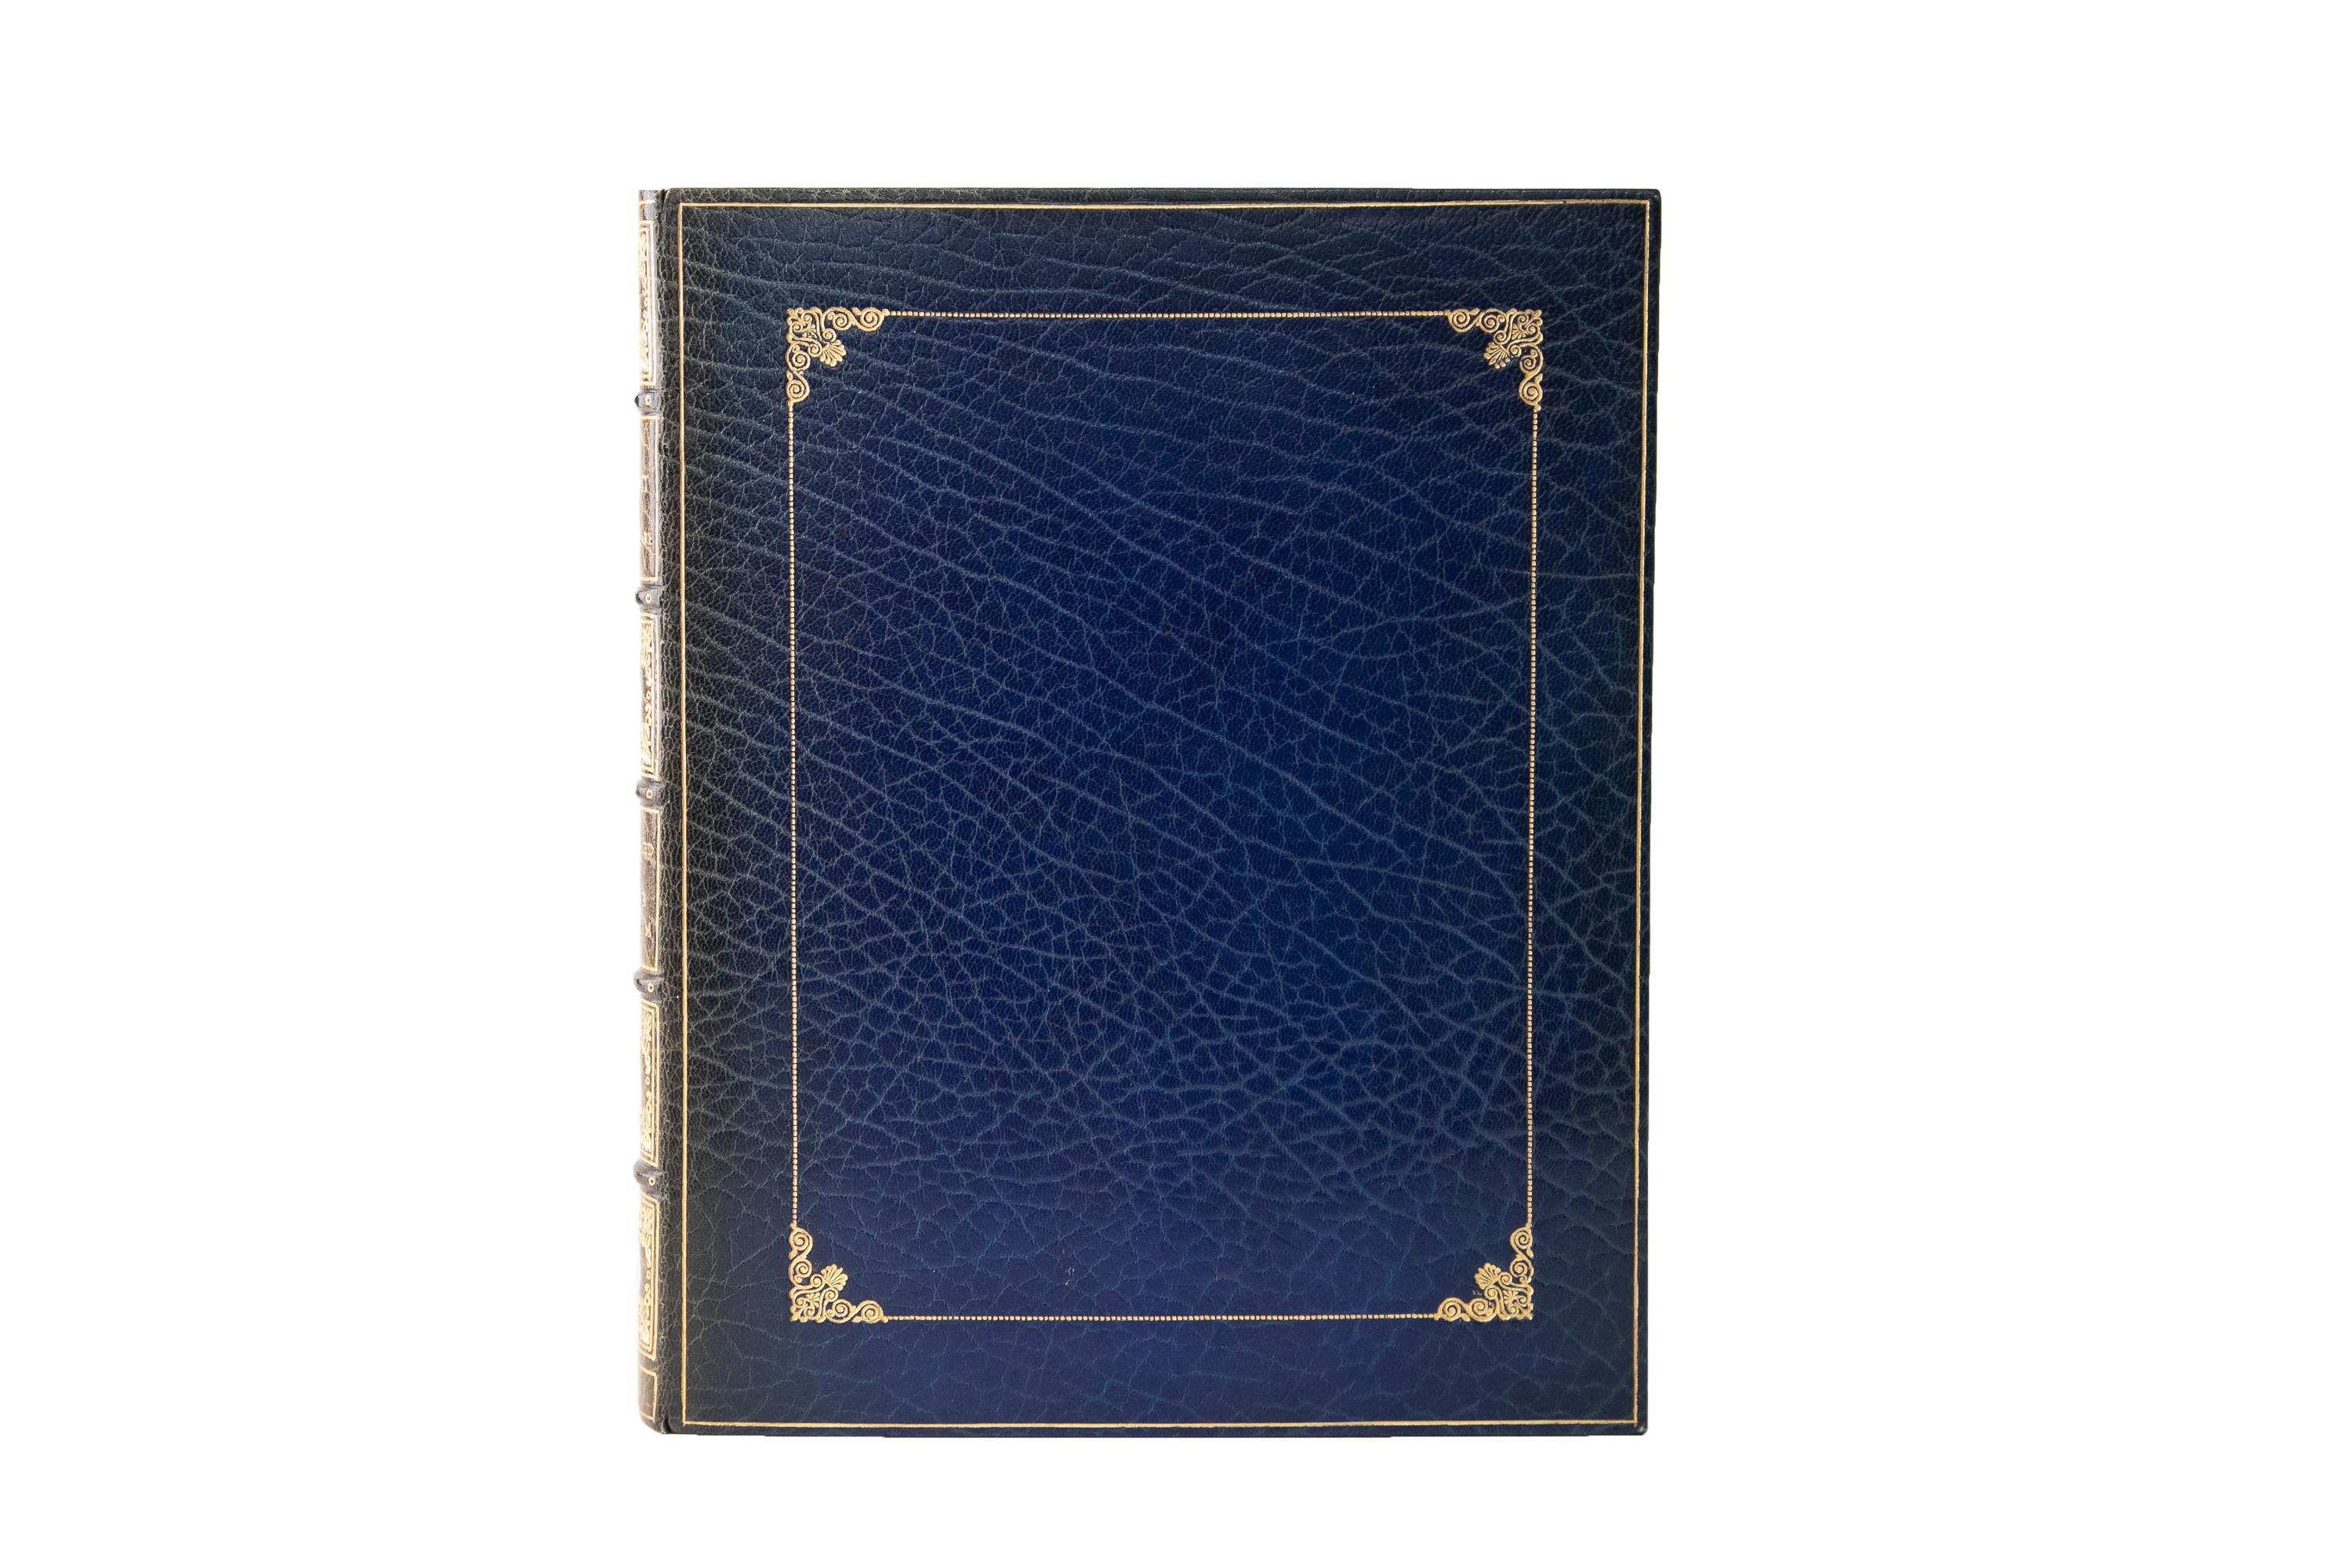 1 Volume. William Shakespeare, The Tempest. Limited Edition. Bound and signed by Bayntun Riviere in full blue morocco with the covers displaying gilt-tooled bordering with floral corner flourishes. The spines are faded to green and display raised